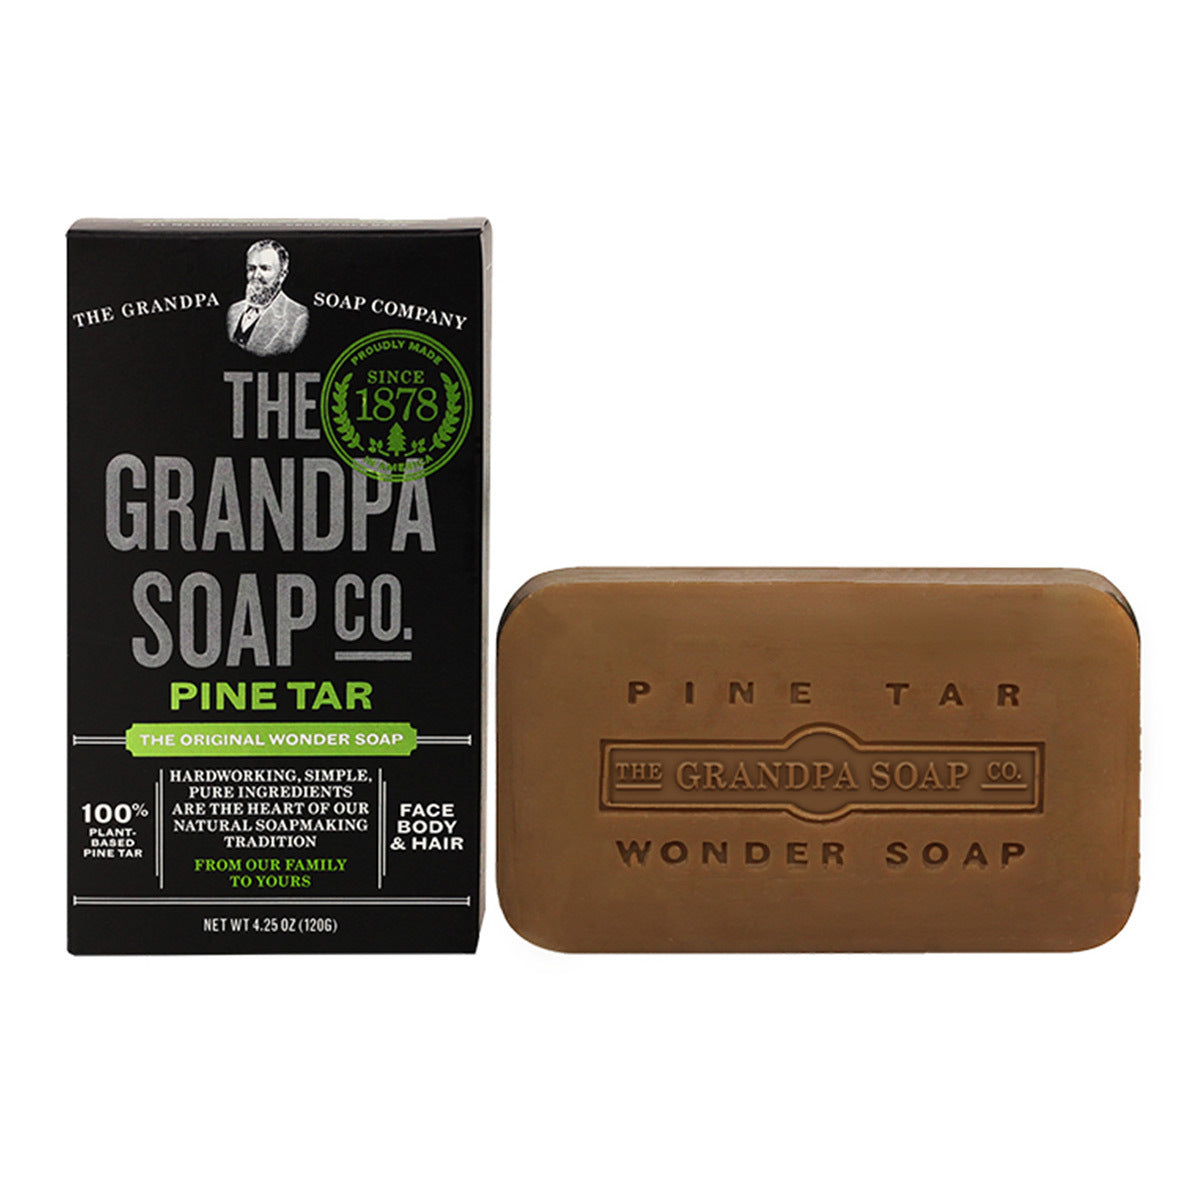 Primary image of Pine Tar Bar Soap